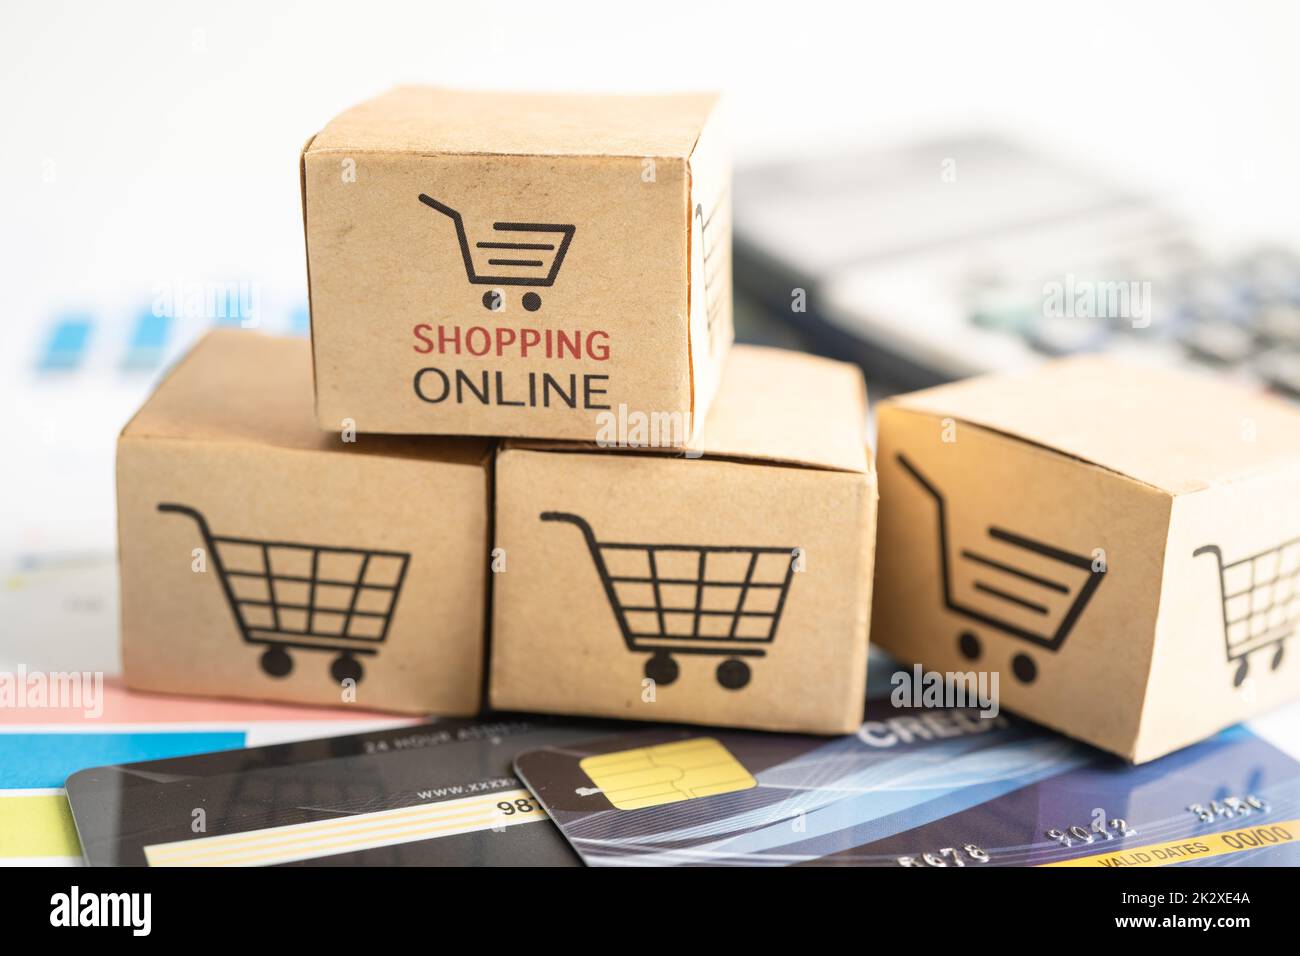 Shopping online box with credit card and calculator on graph. Finance commerce import export business concept. Stock Photo